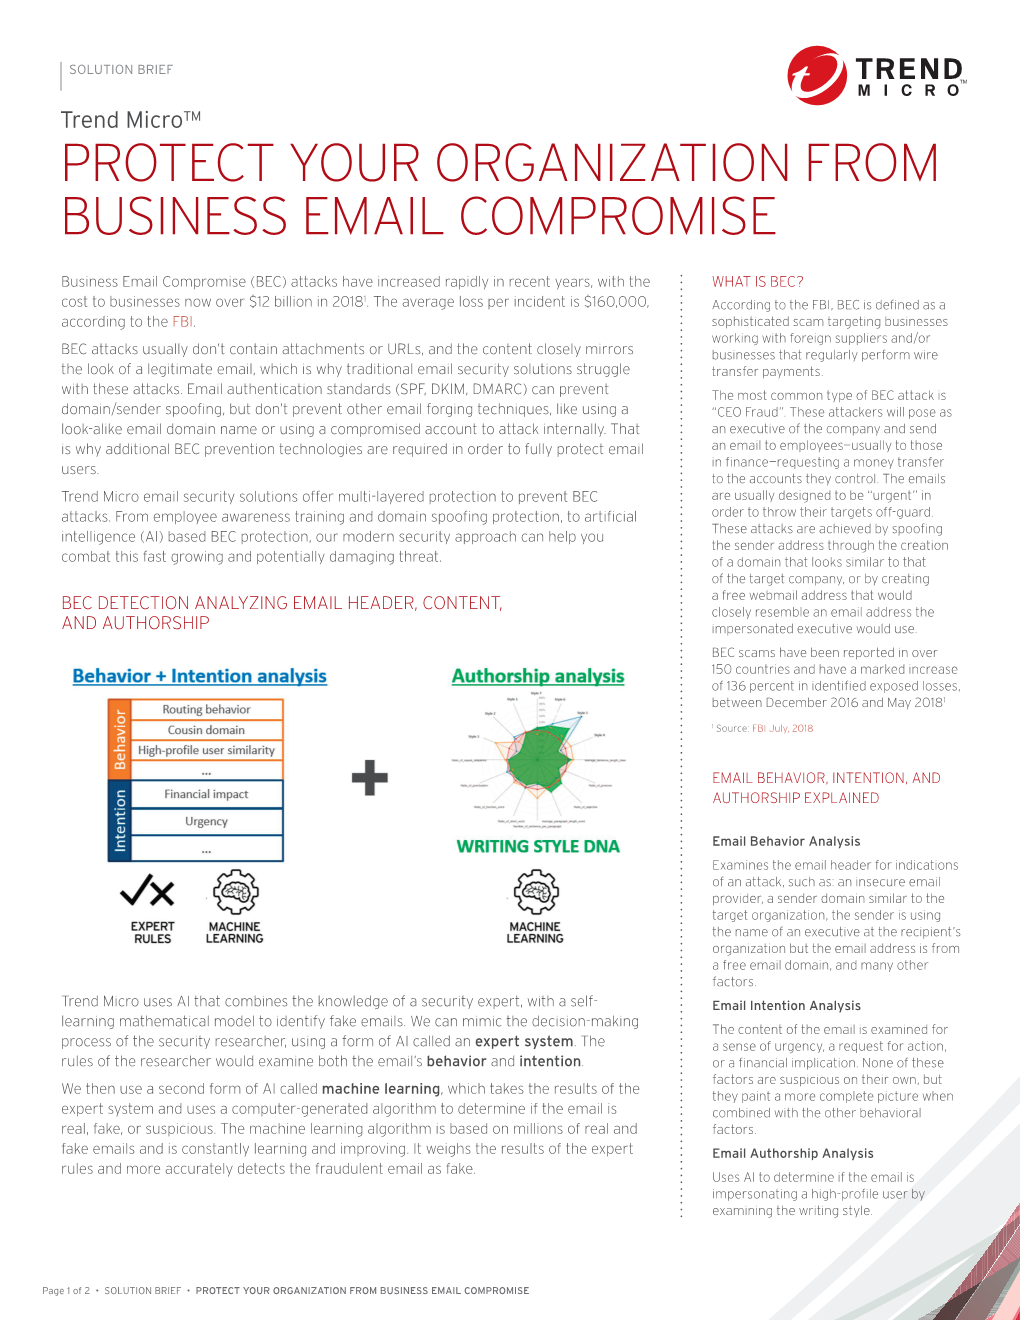 Protect Your Organization from Business Email Compromise